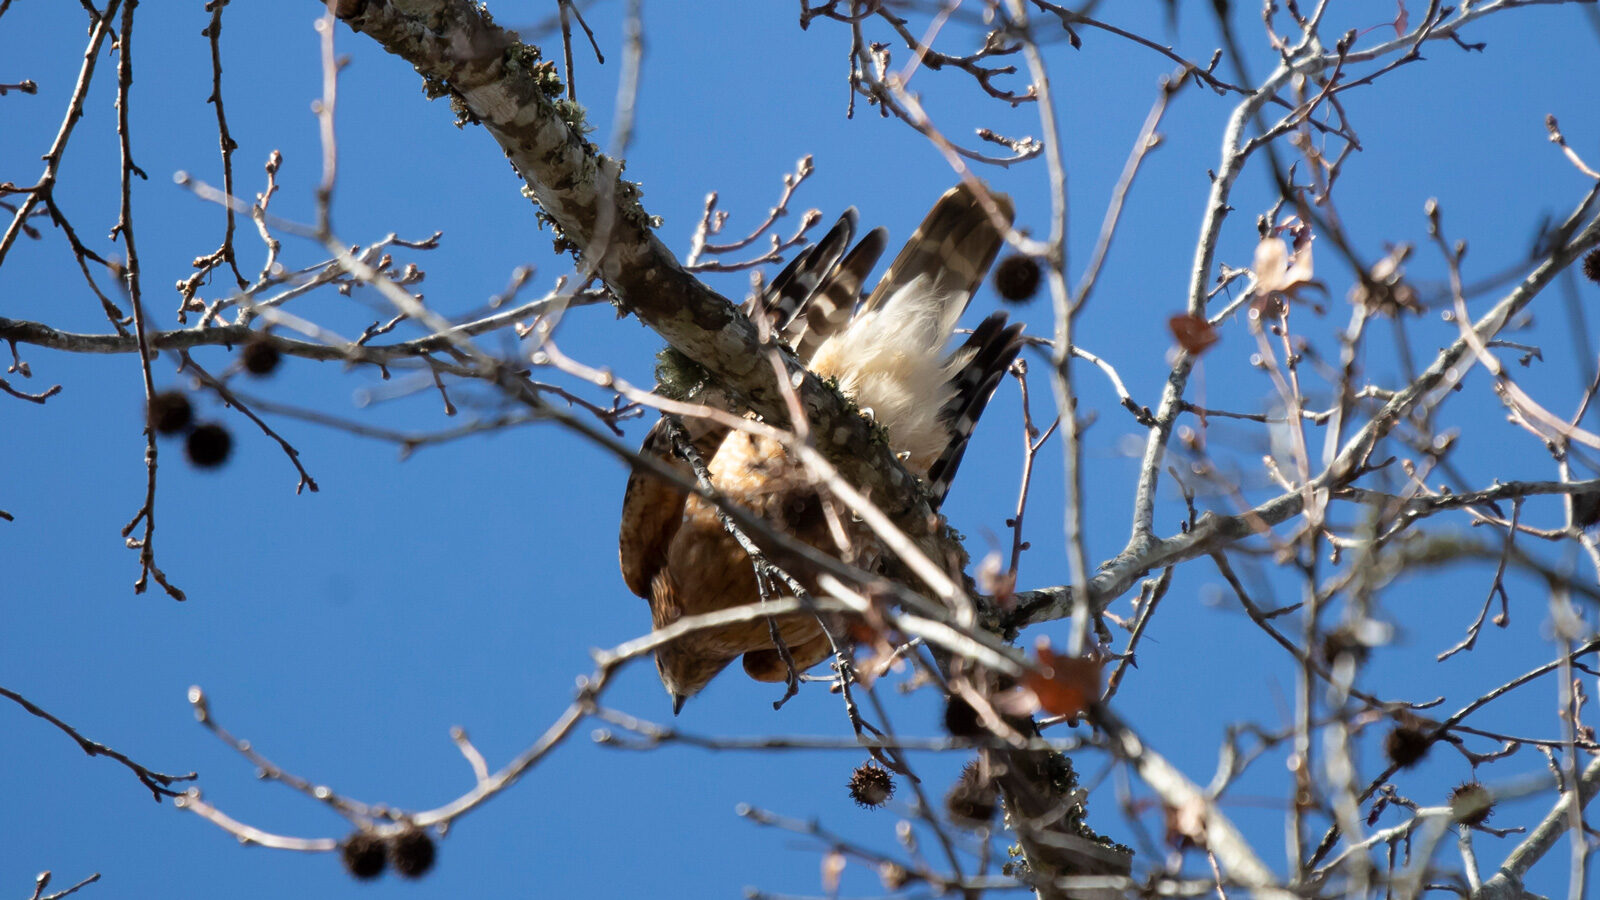 Red-shouldered hawk looking down from tree limb